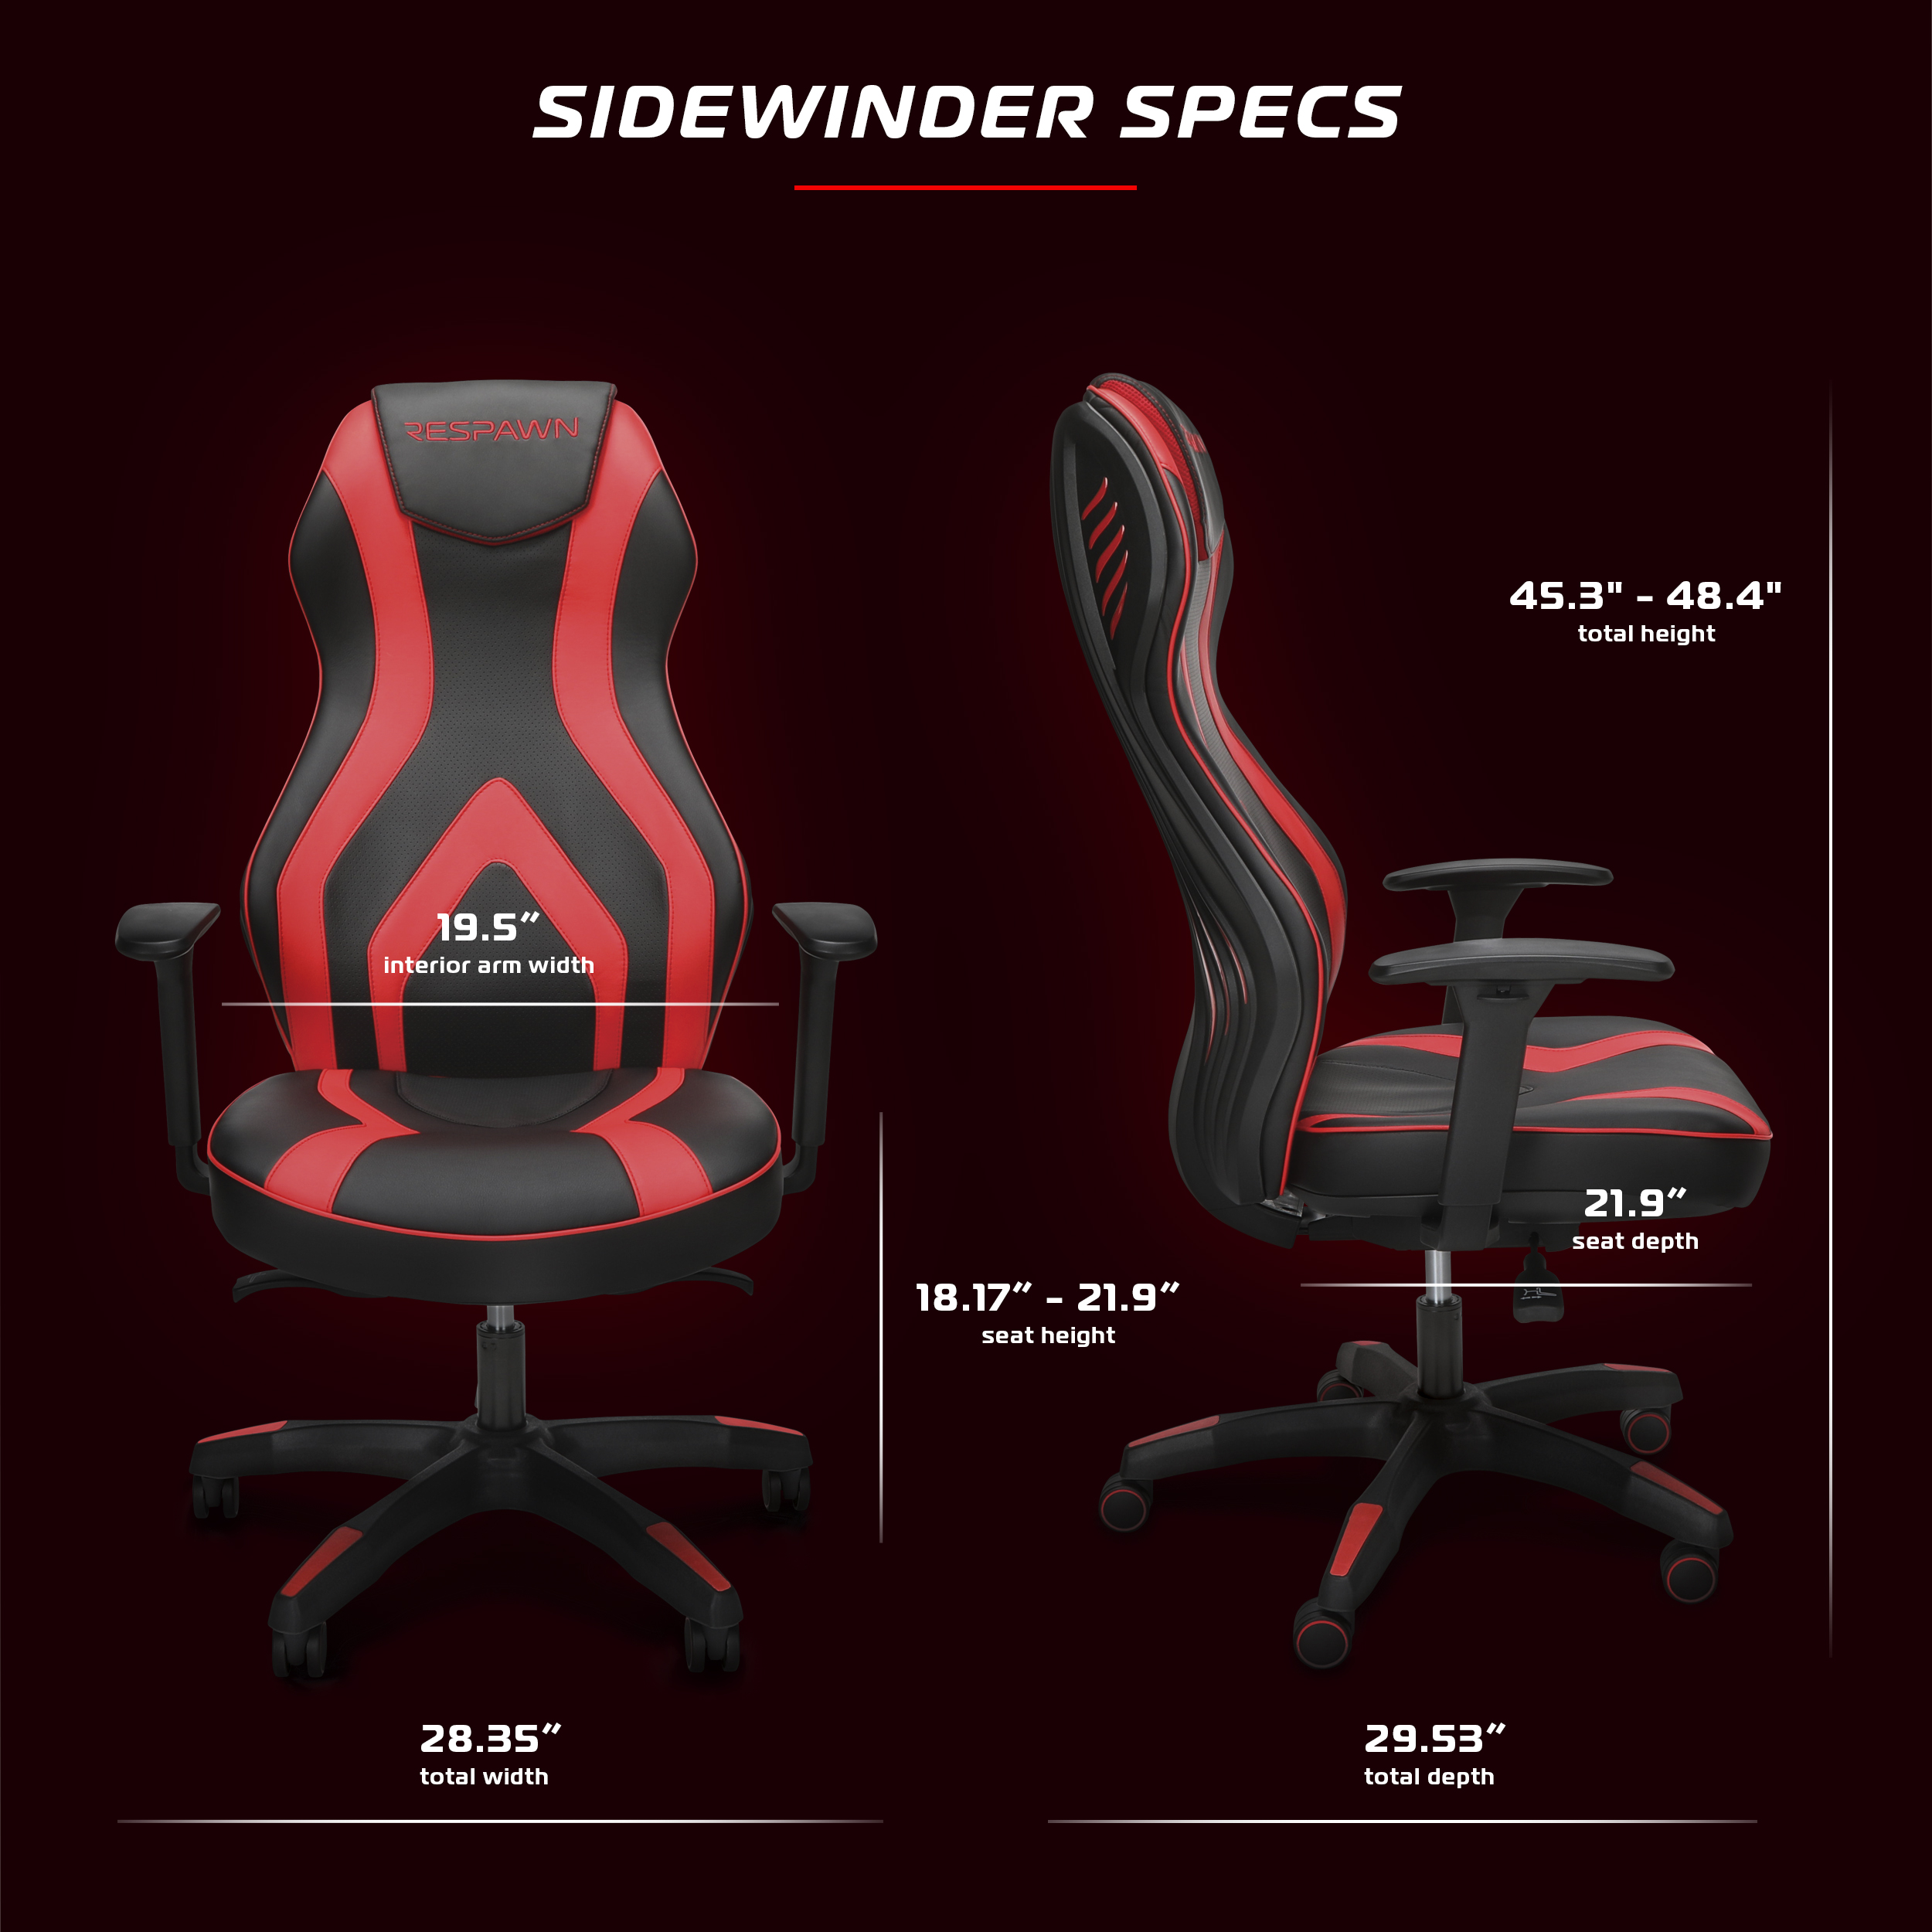 RESPAWN Sidewinder Gaming Chair, PU Leather, in Rage Red (RSP-125-RED) - image 3 of 17